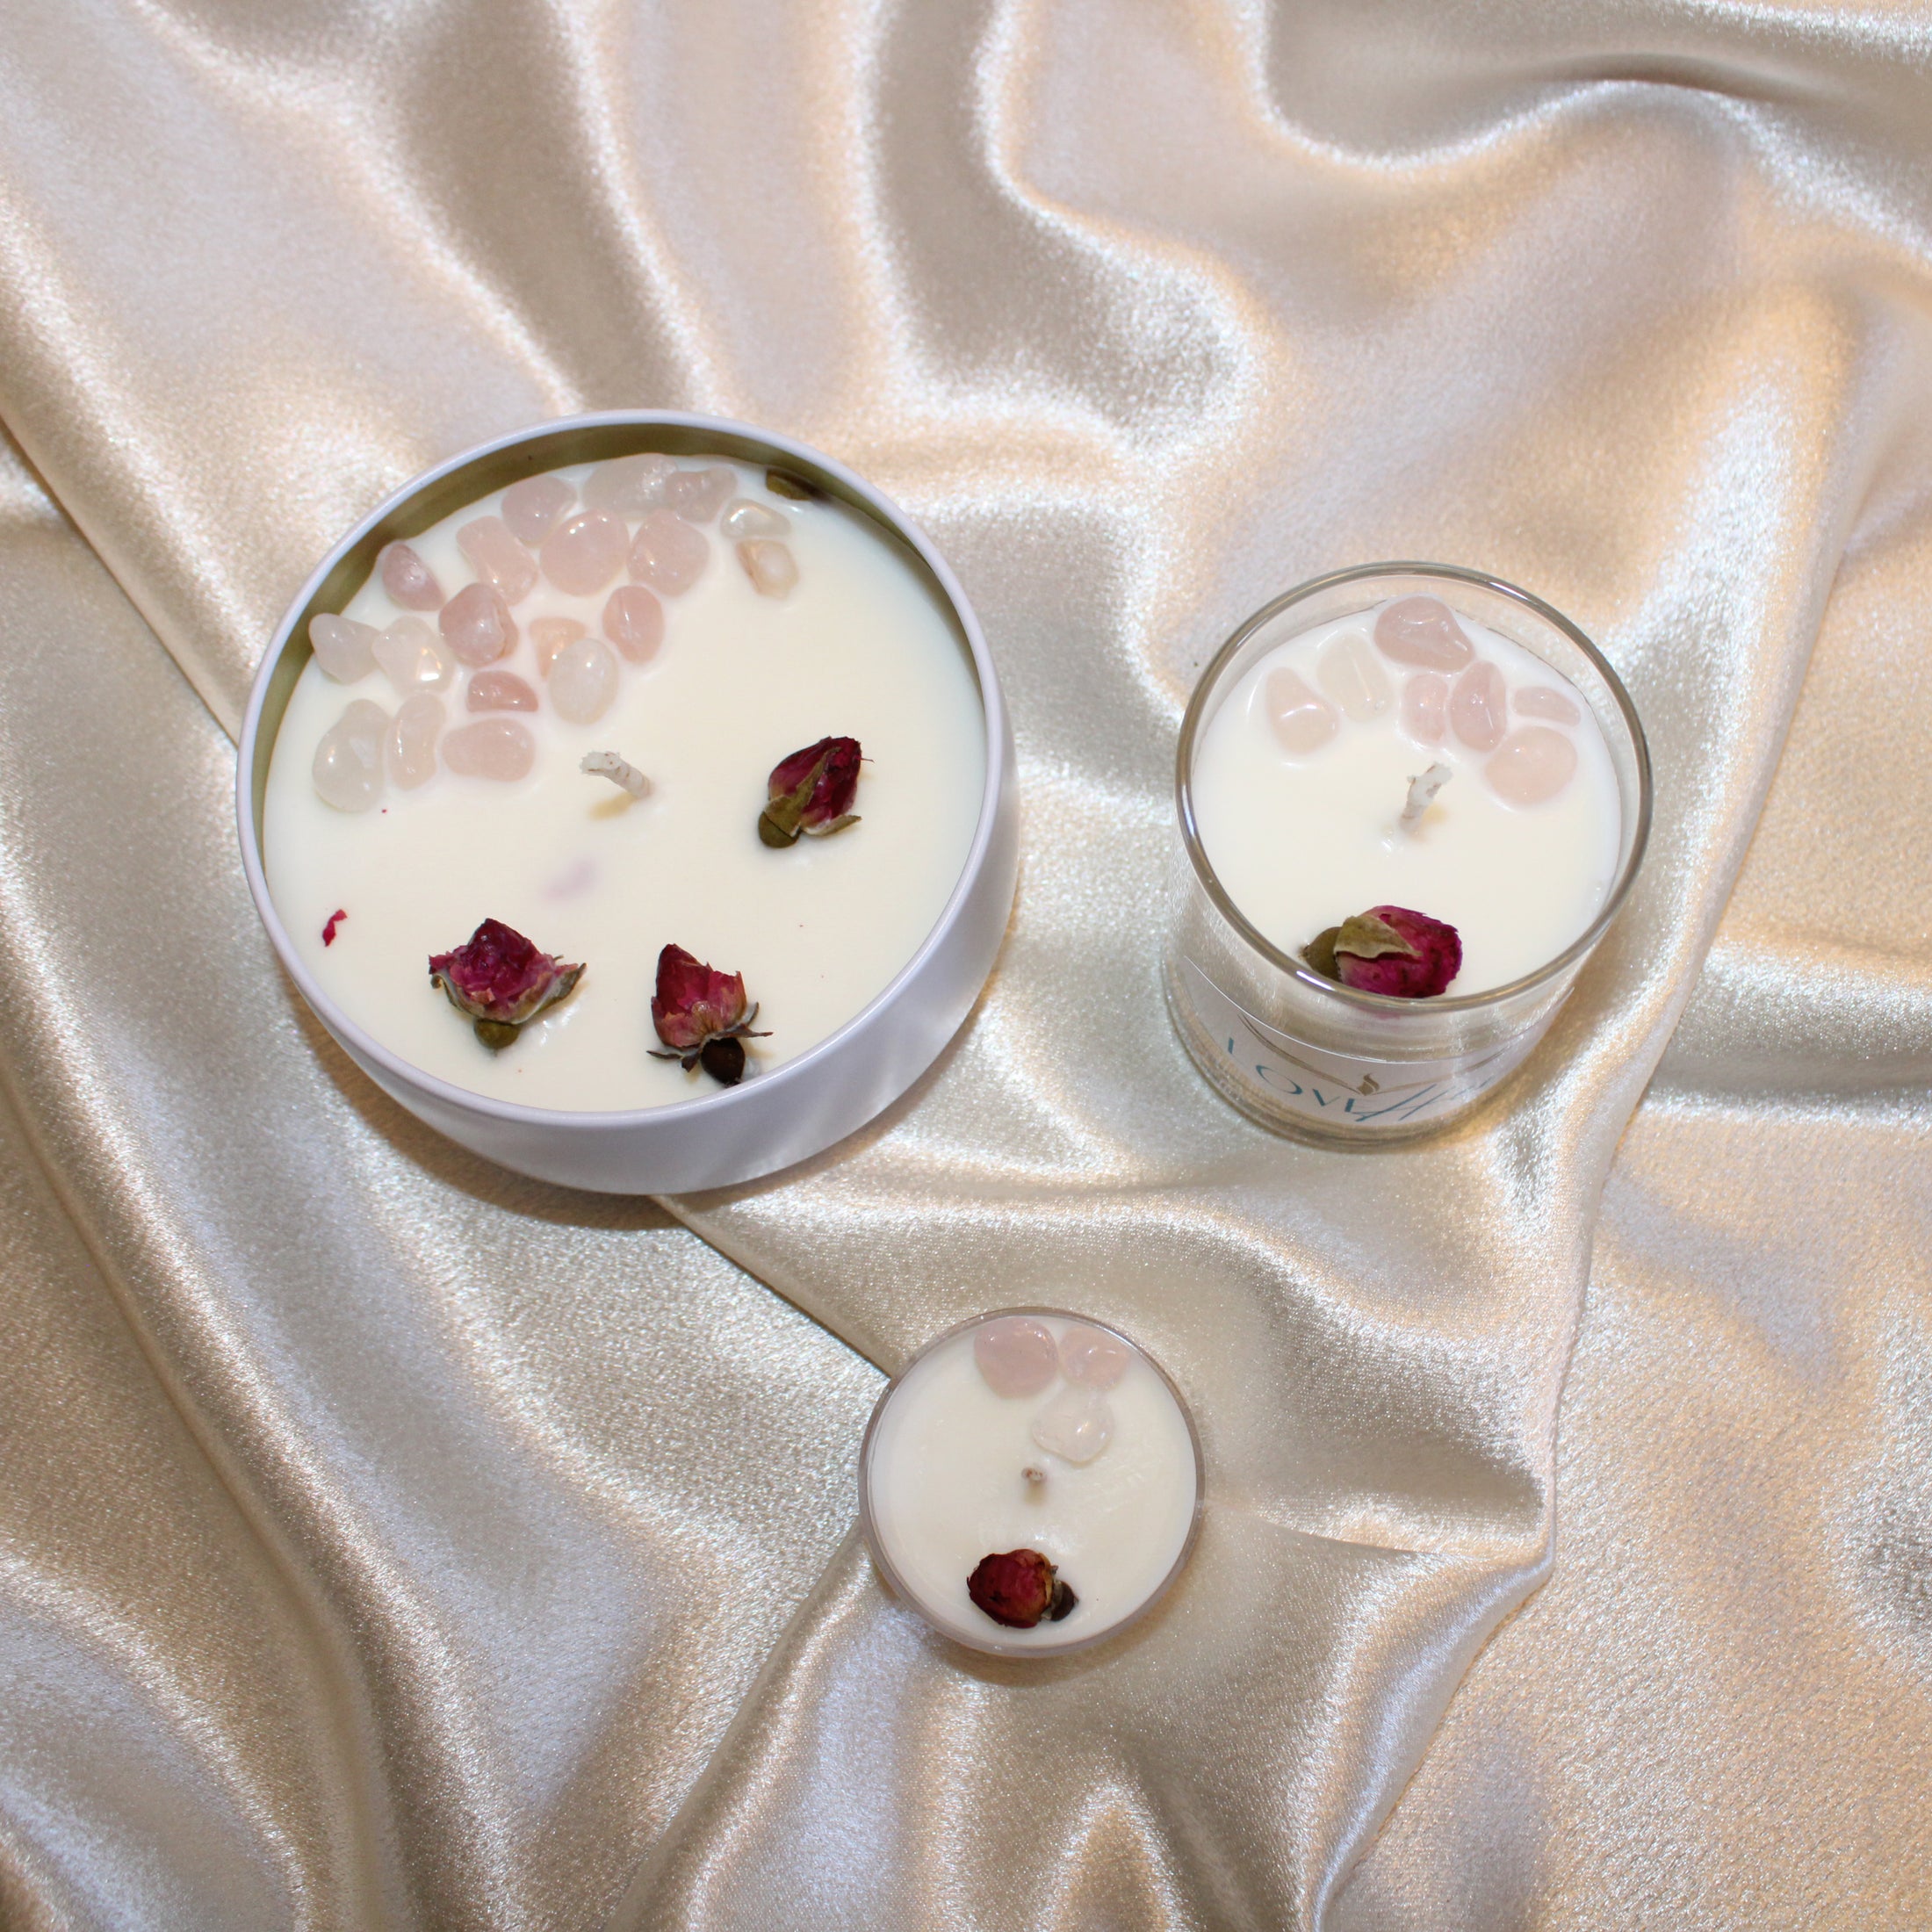 "LoveHer" Crystal Infused Soy Candle